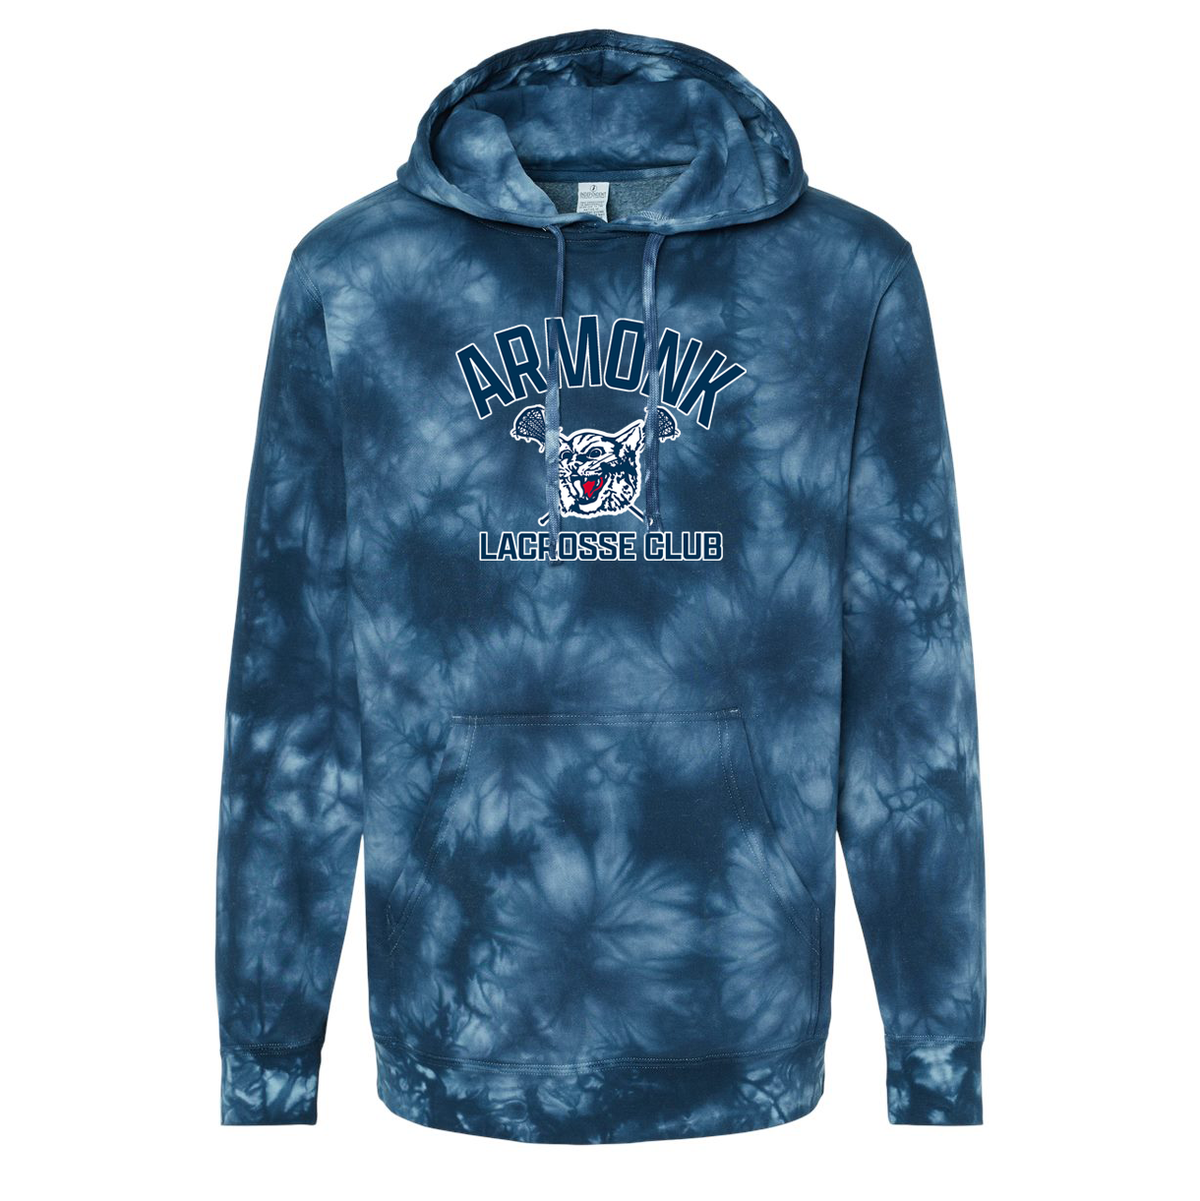 Armonk Lacrosse Club Pigment-Dyed Hooded Sweatshirt (Youth & Adult)